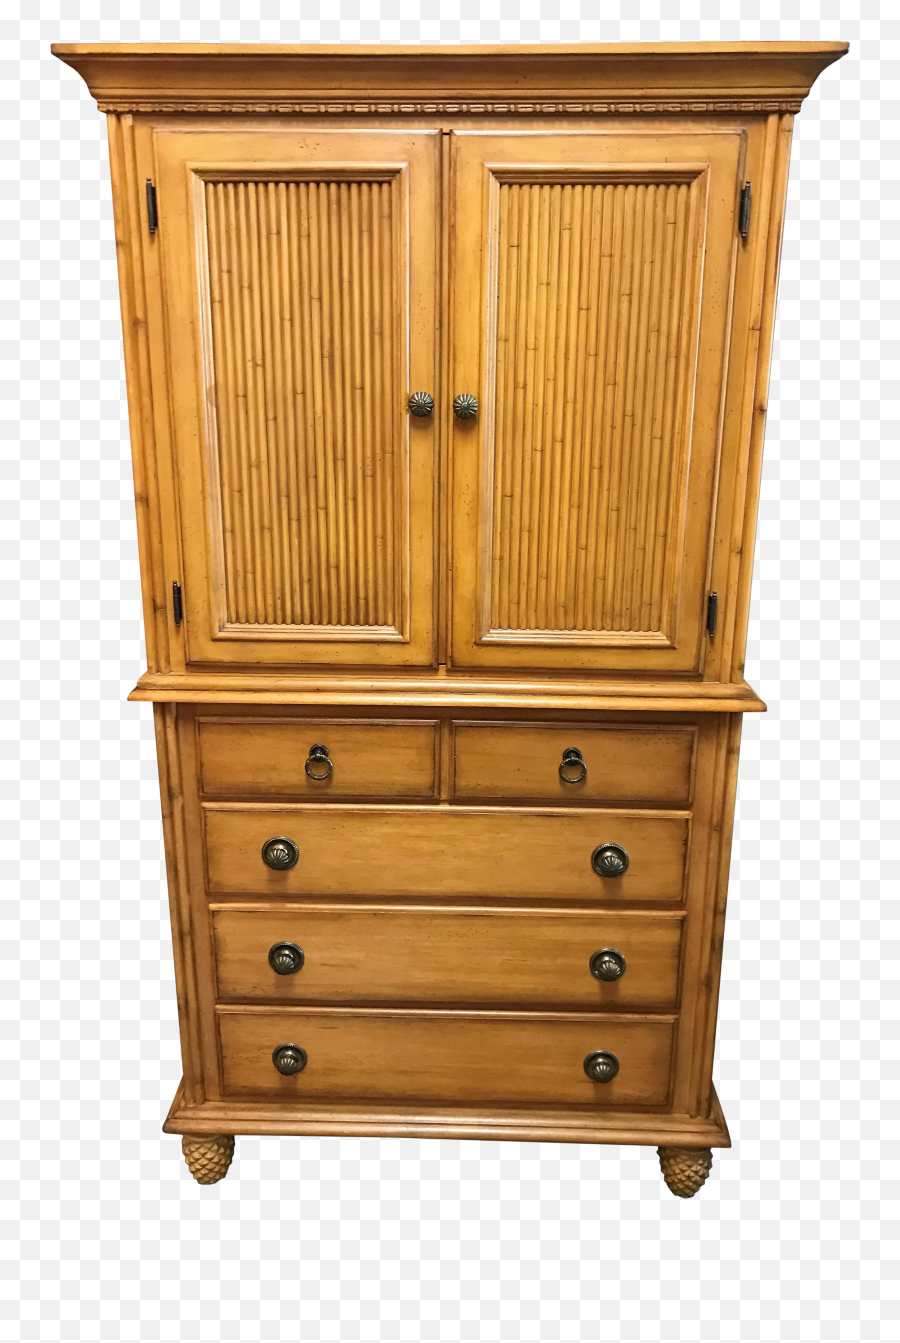 Tommy Bahama For Lexington Furniture Solid Wood Armoire With Bamboo And Pineapple Carved Wood Details - Tommy Bahama Dresser Pineapple Legs Emoji,Tommy Bahama Logo